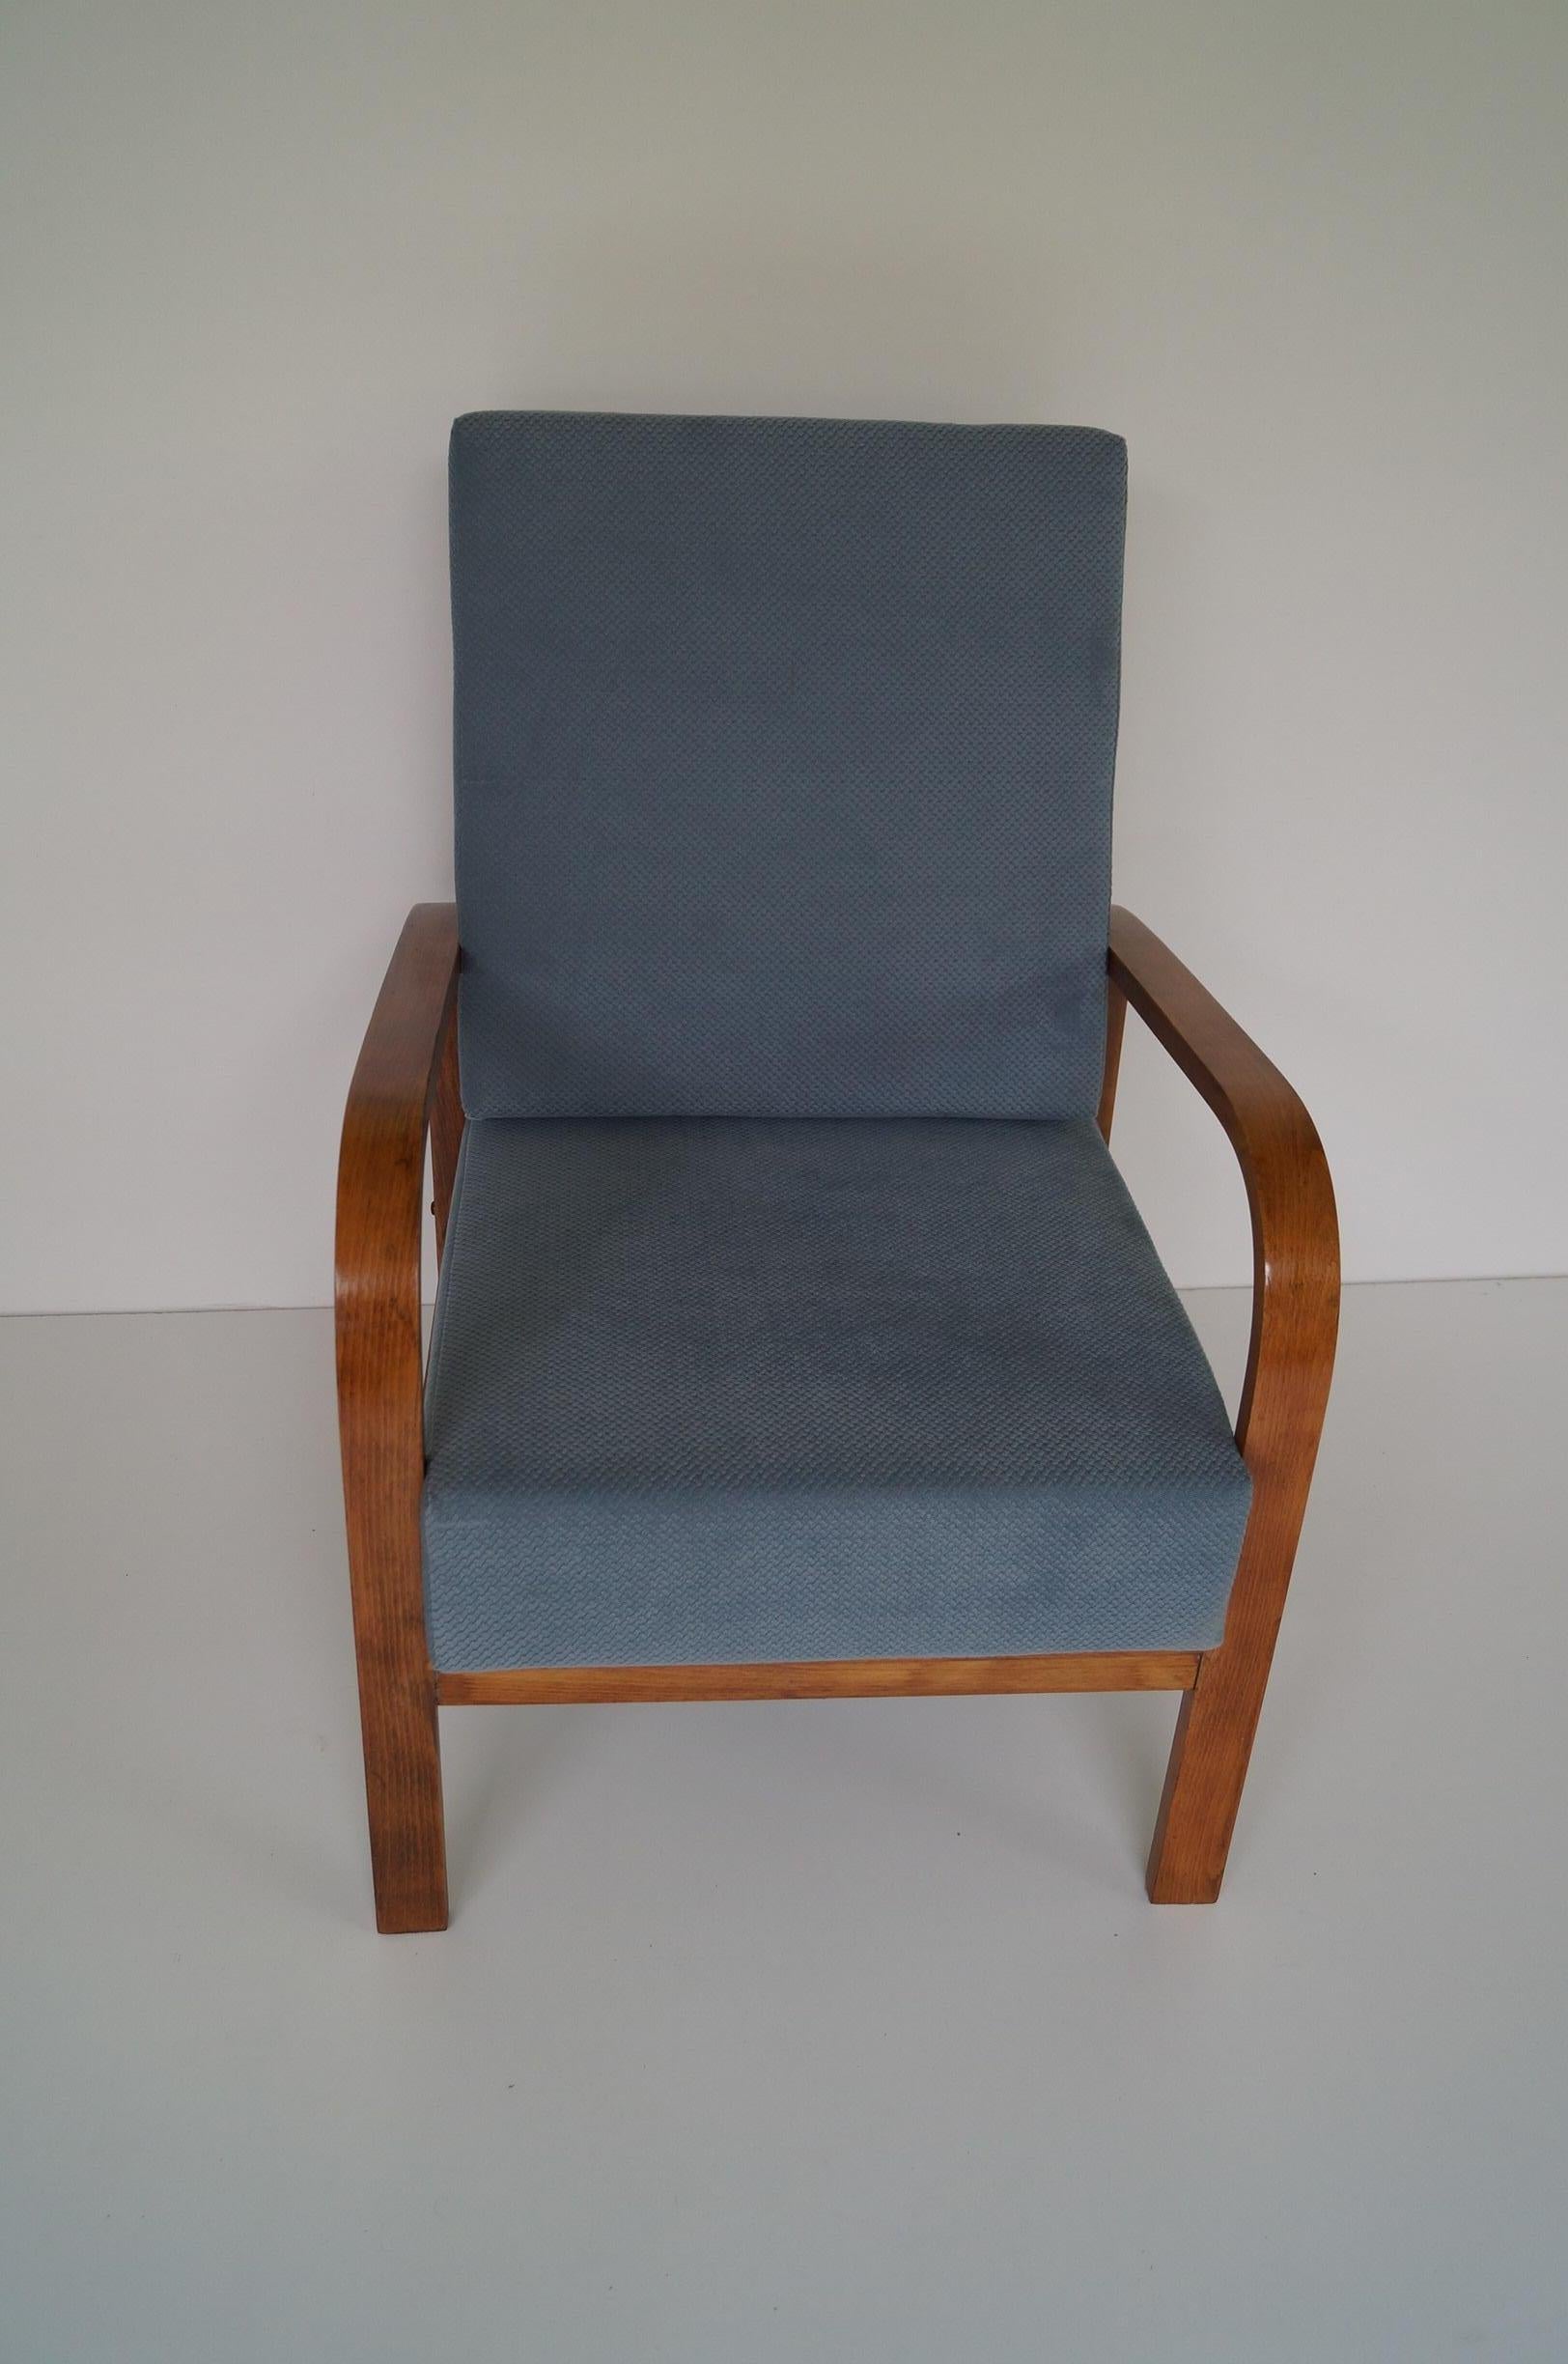 Art Deco armchair from 1950 
Every piece of furniture that leaves our workshop from the beginning to the end is subjected to manual renovation, so as to restore its original condition from many years ago (It has been cleaned to bare veneer,